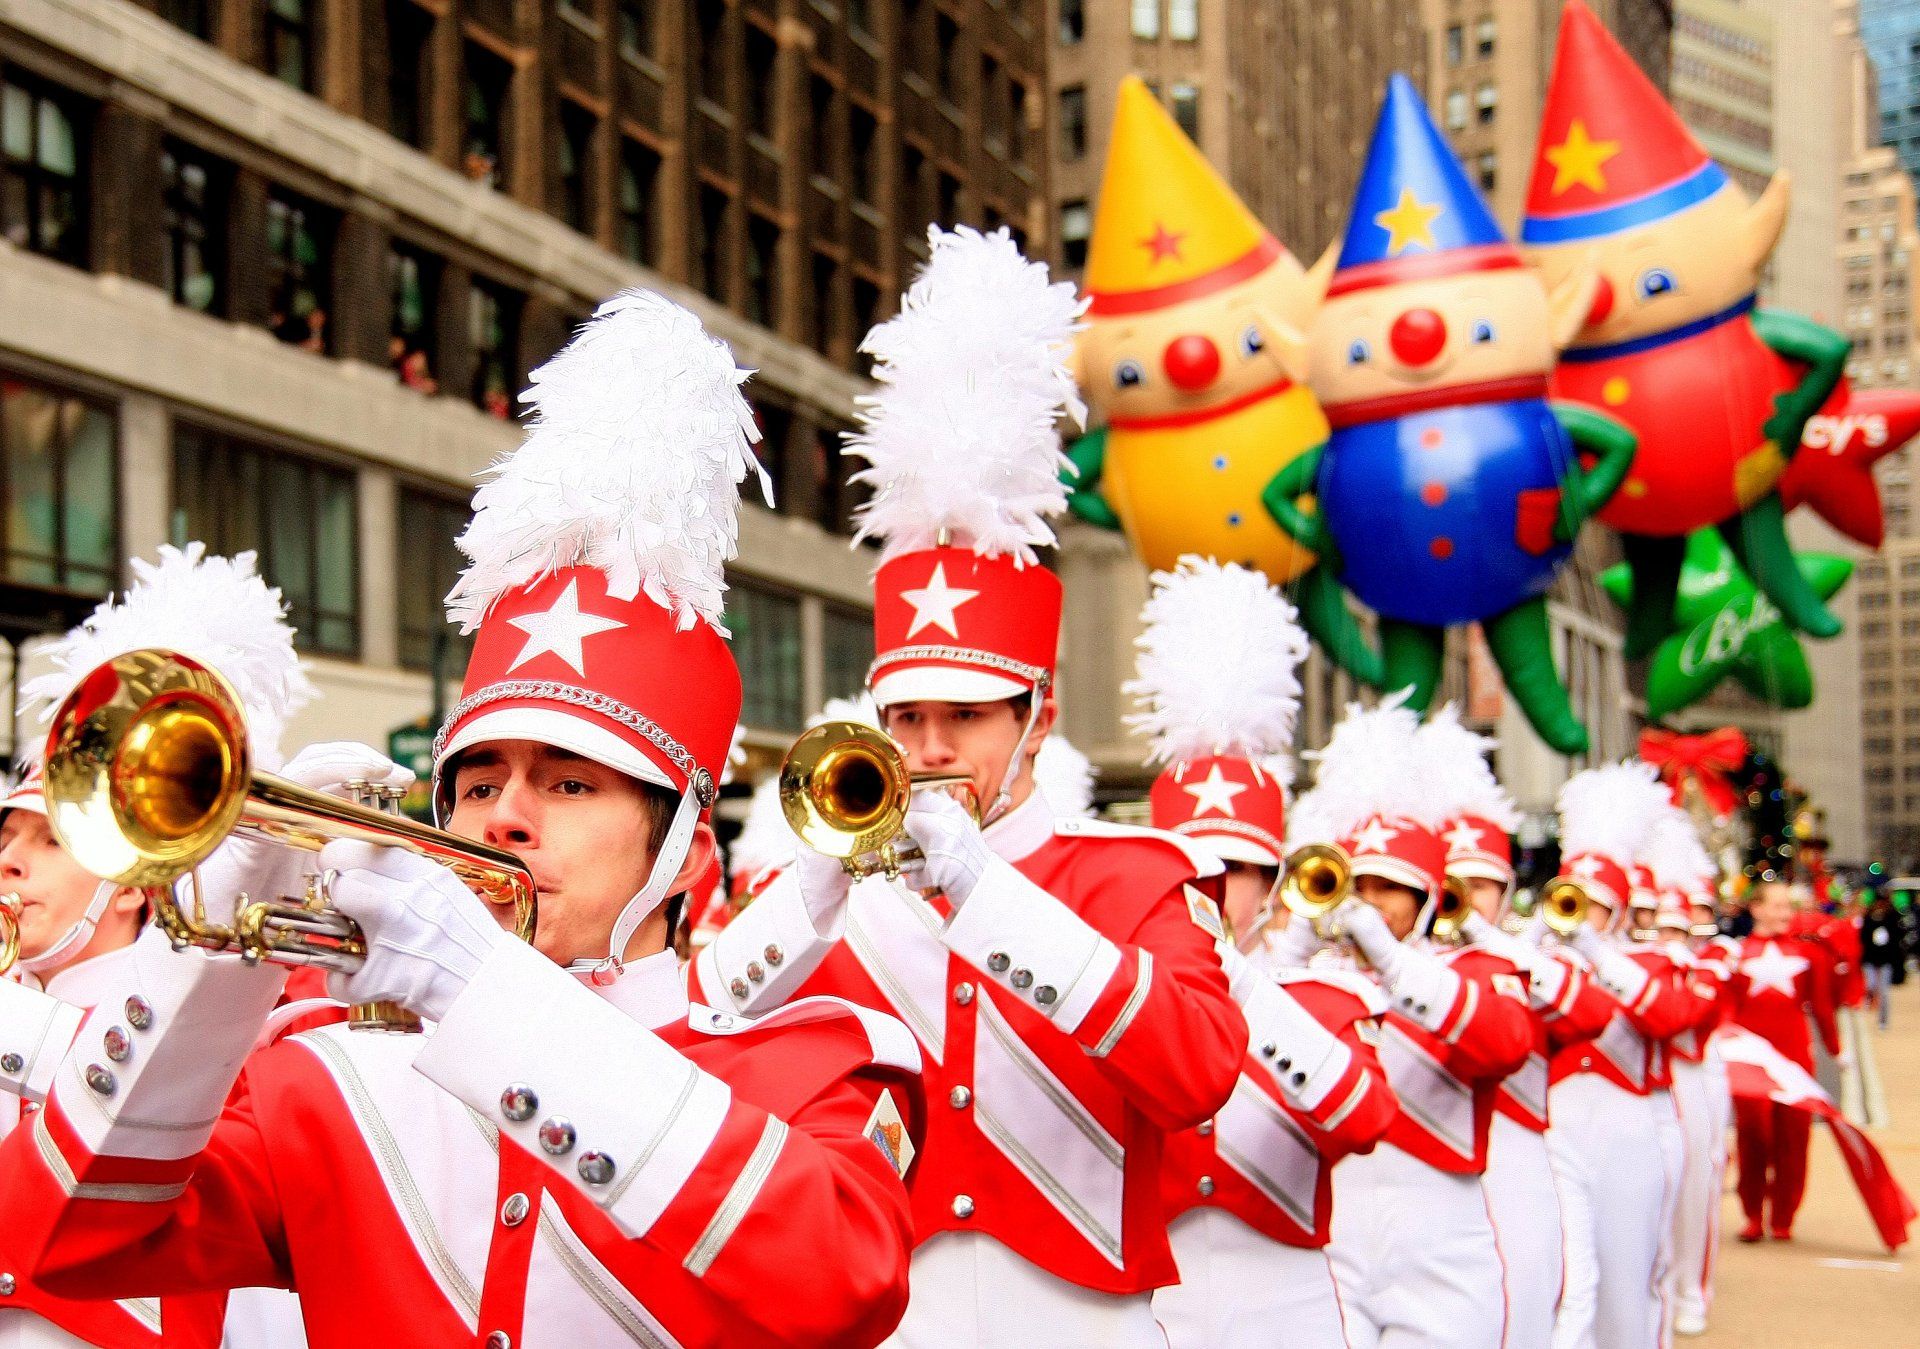 (1) Largest Thanksgiving Day Parade: Macy's Thanksgiving Day Parade sets world record Largest Thanksgiving Day Parade: Macy's Thanksgiving Day Parade sets world record By